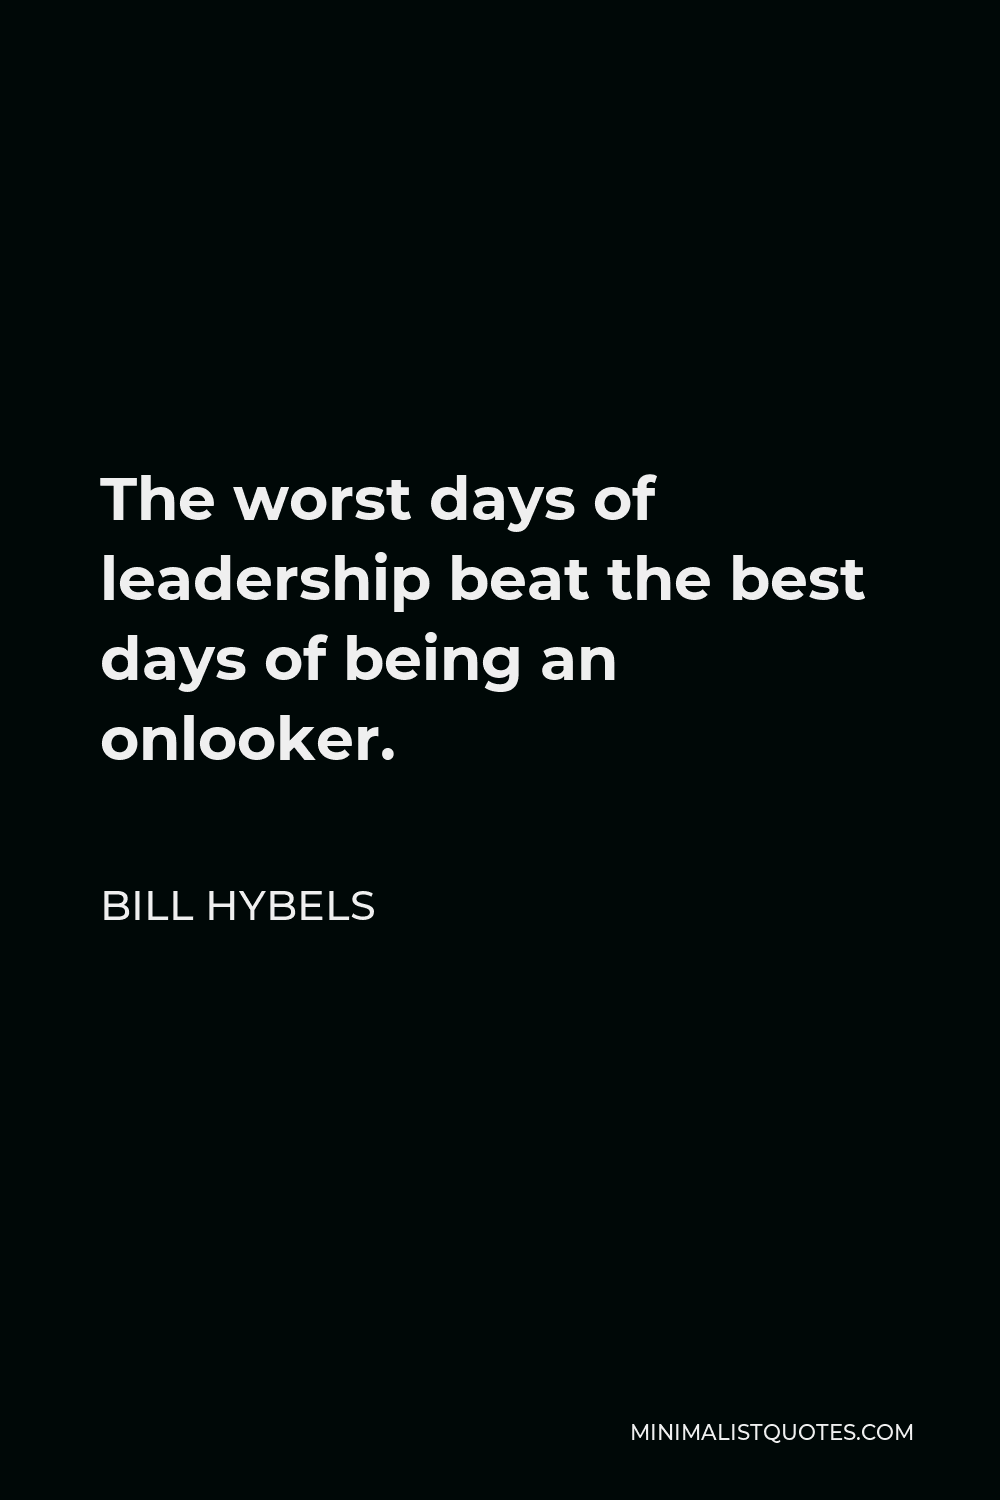 Bill Hybels Quote - The worst days of leadership beat the best days of being an onlooker.